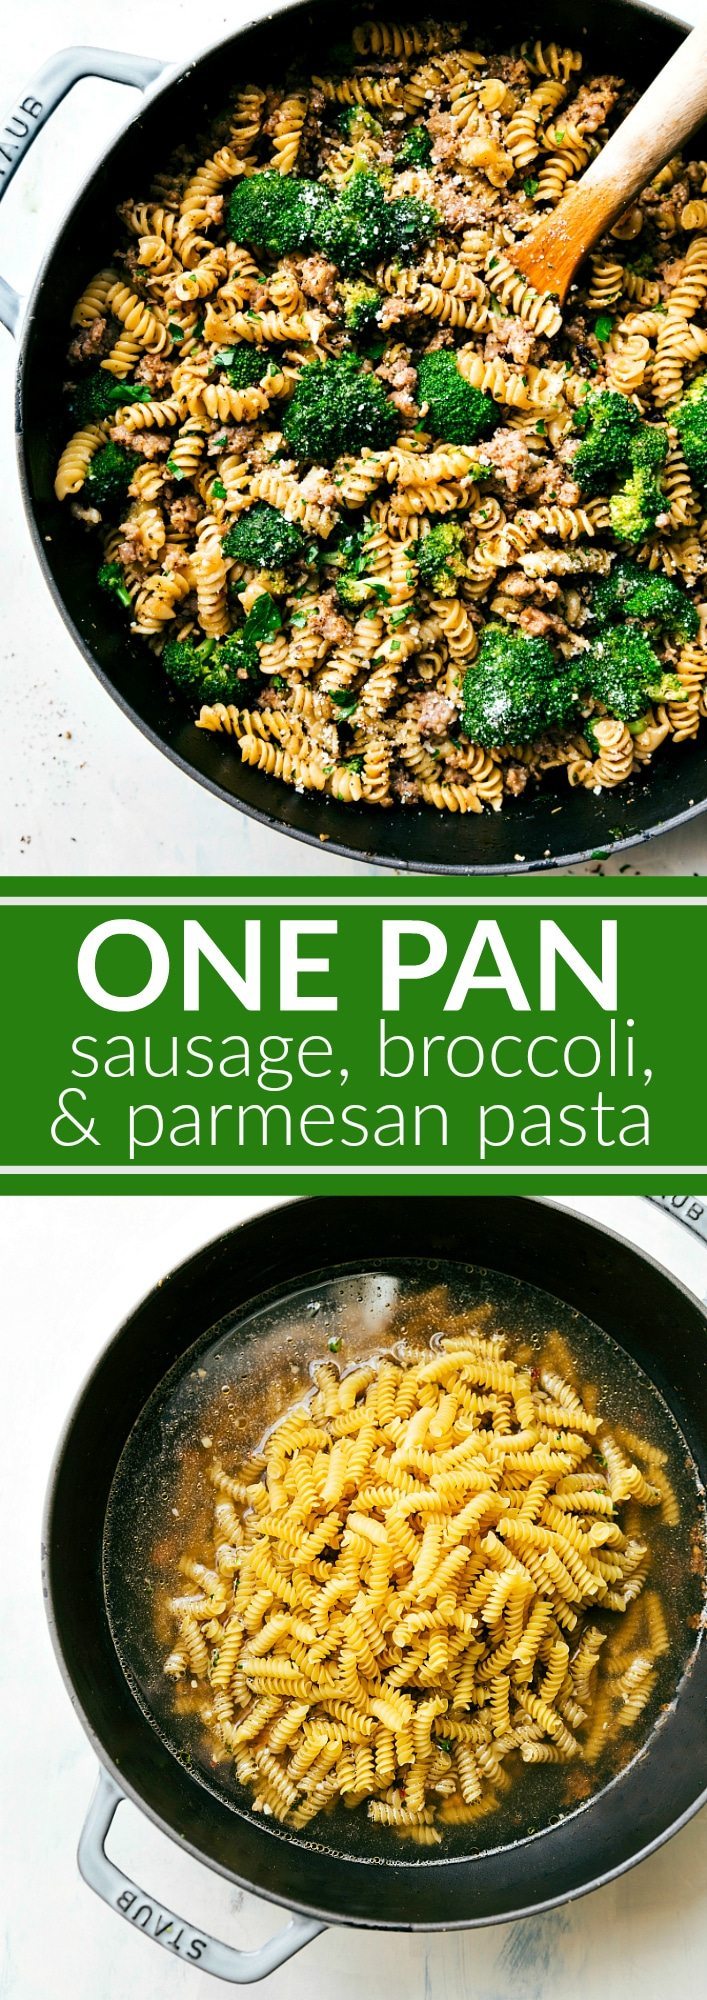 An easy, delicious, wholesome dinner of parmesan and herb pasta, ground Italian sausage & broccoli all made in just ONE pan! via chelseasmessyapron.com